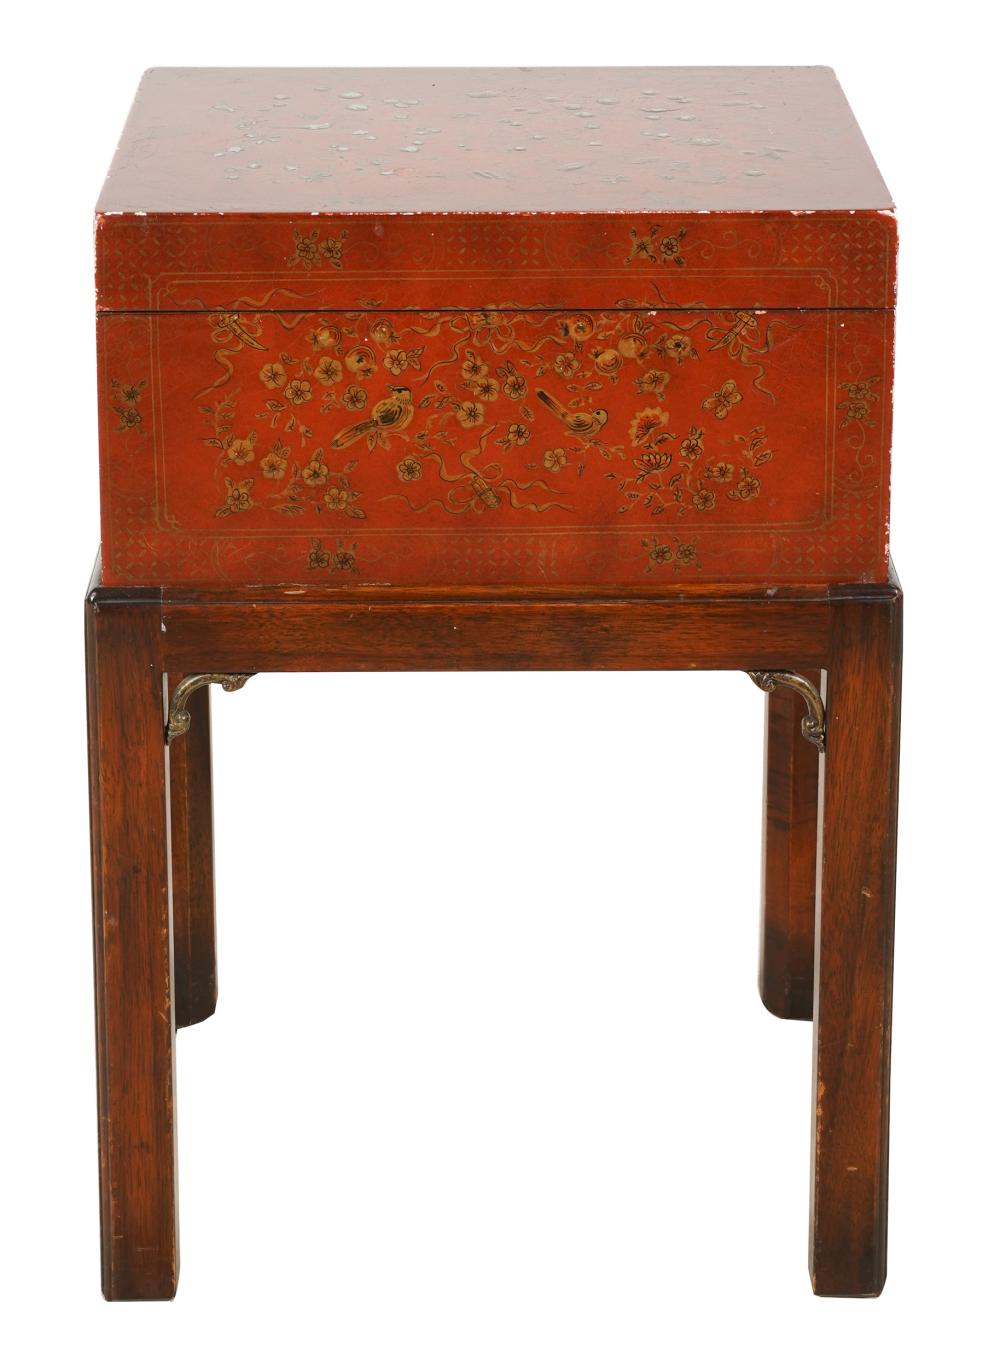 CHINESE STYLE LACQUERED MAHOGANY 334b25